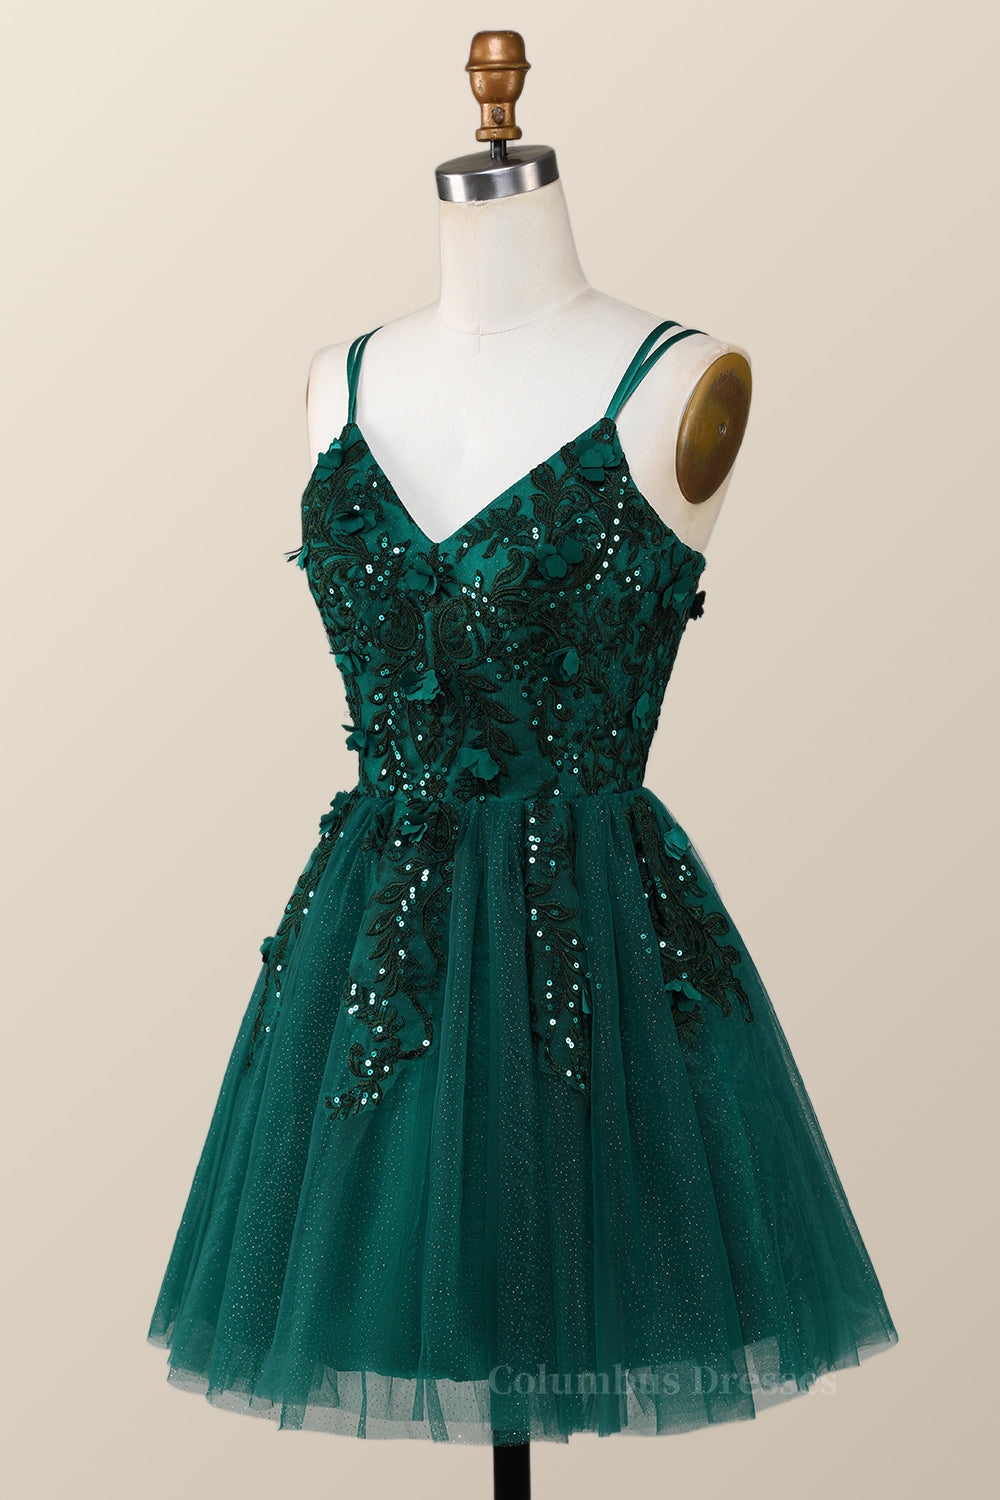 Formal Dress With Sleeve, Dark Green Embroidered A-line Short Homecoming Dress